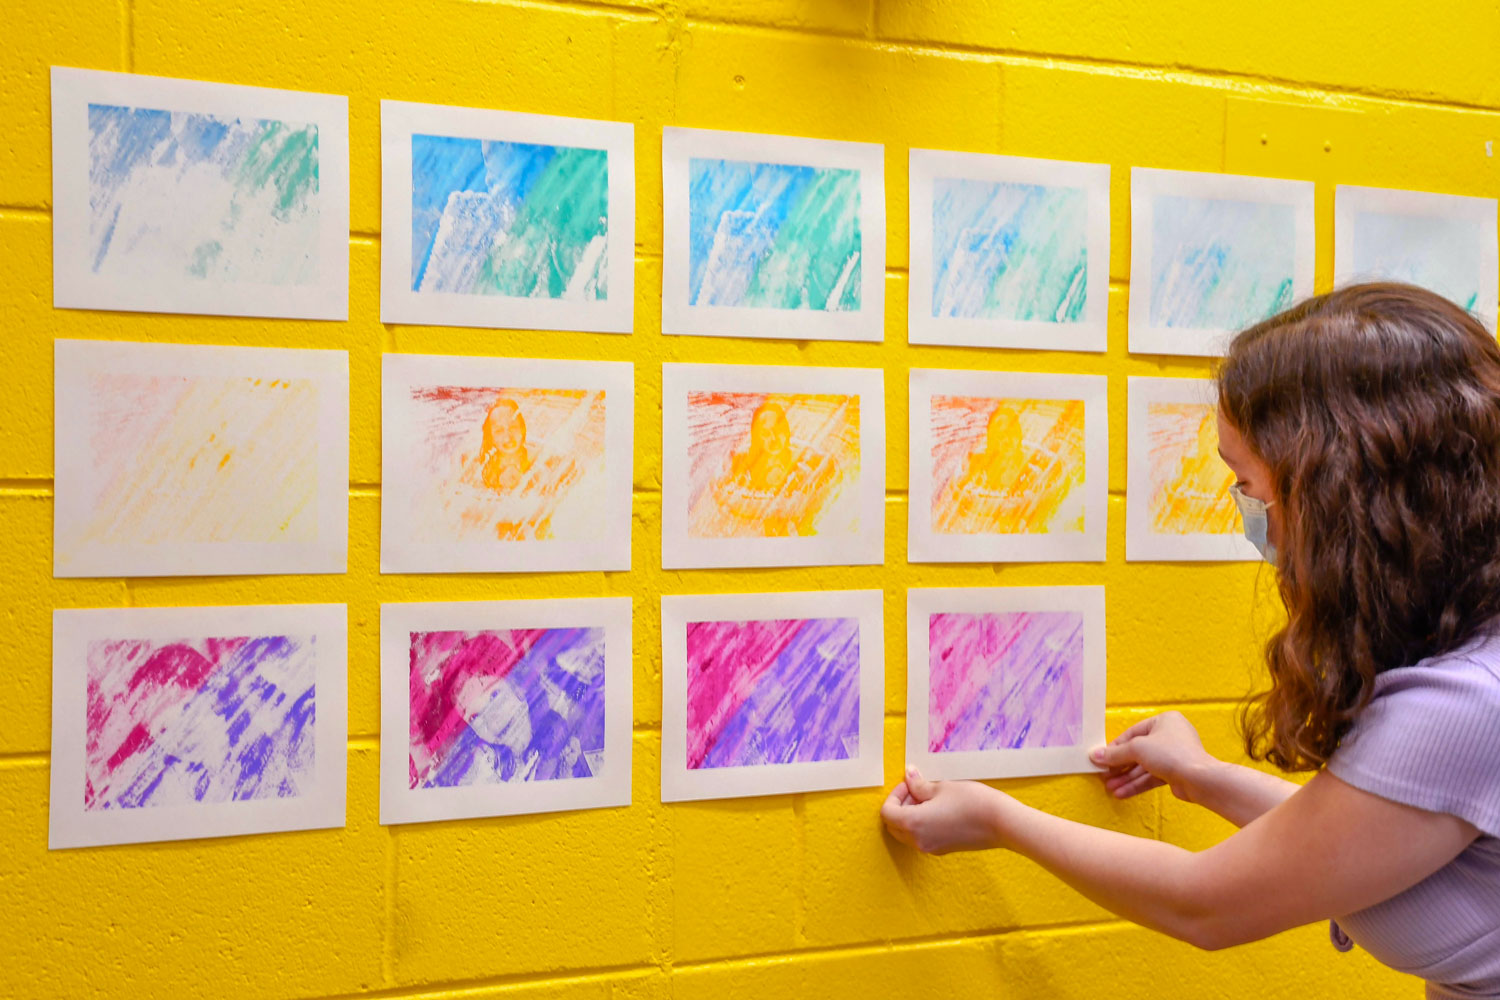 Elora installing the prints onto a yellow wall, arranged in a grid. The photo is taken from the back side. She has brown curly hair and is wearing a mask and a light purple shirt. Only the side of her face is visible, and she is using her hands to apply a print to the 3rd row.